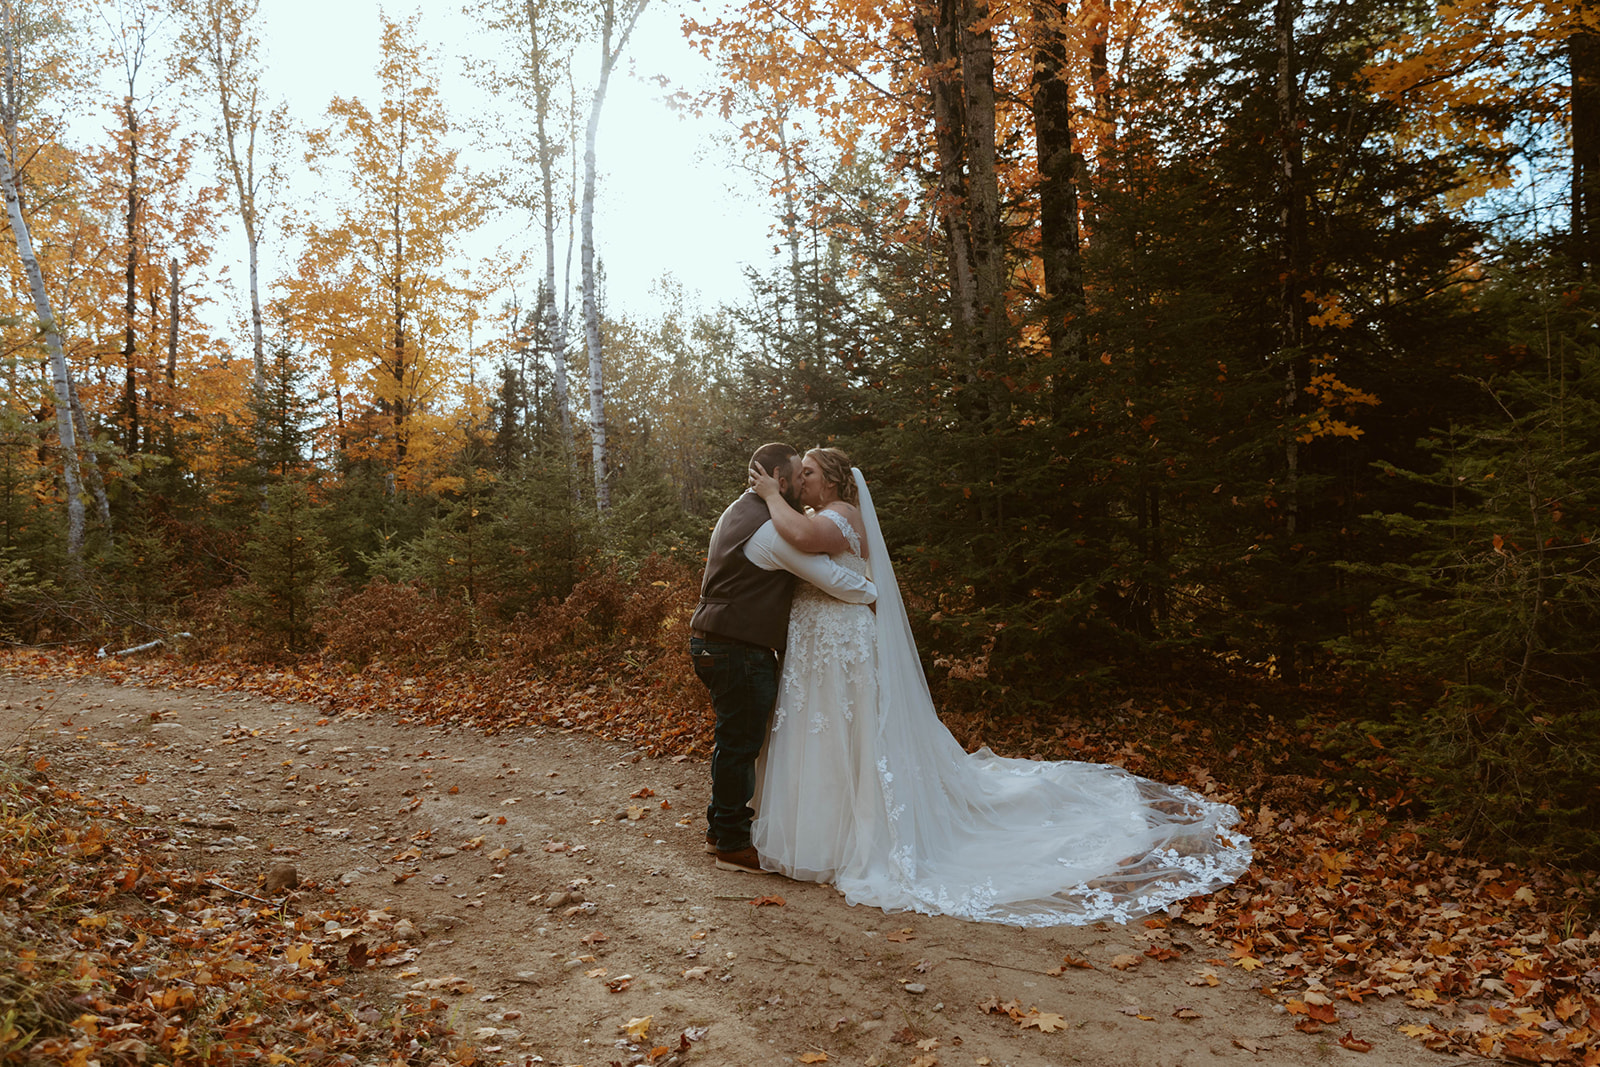 Outdoor Fall bridal portrait in the leaves with the bride and groom.